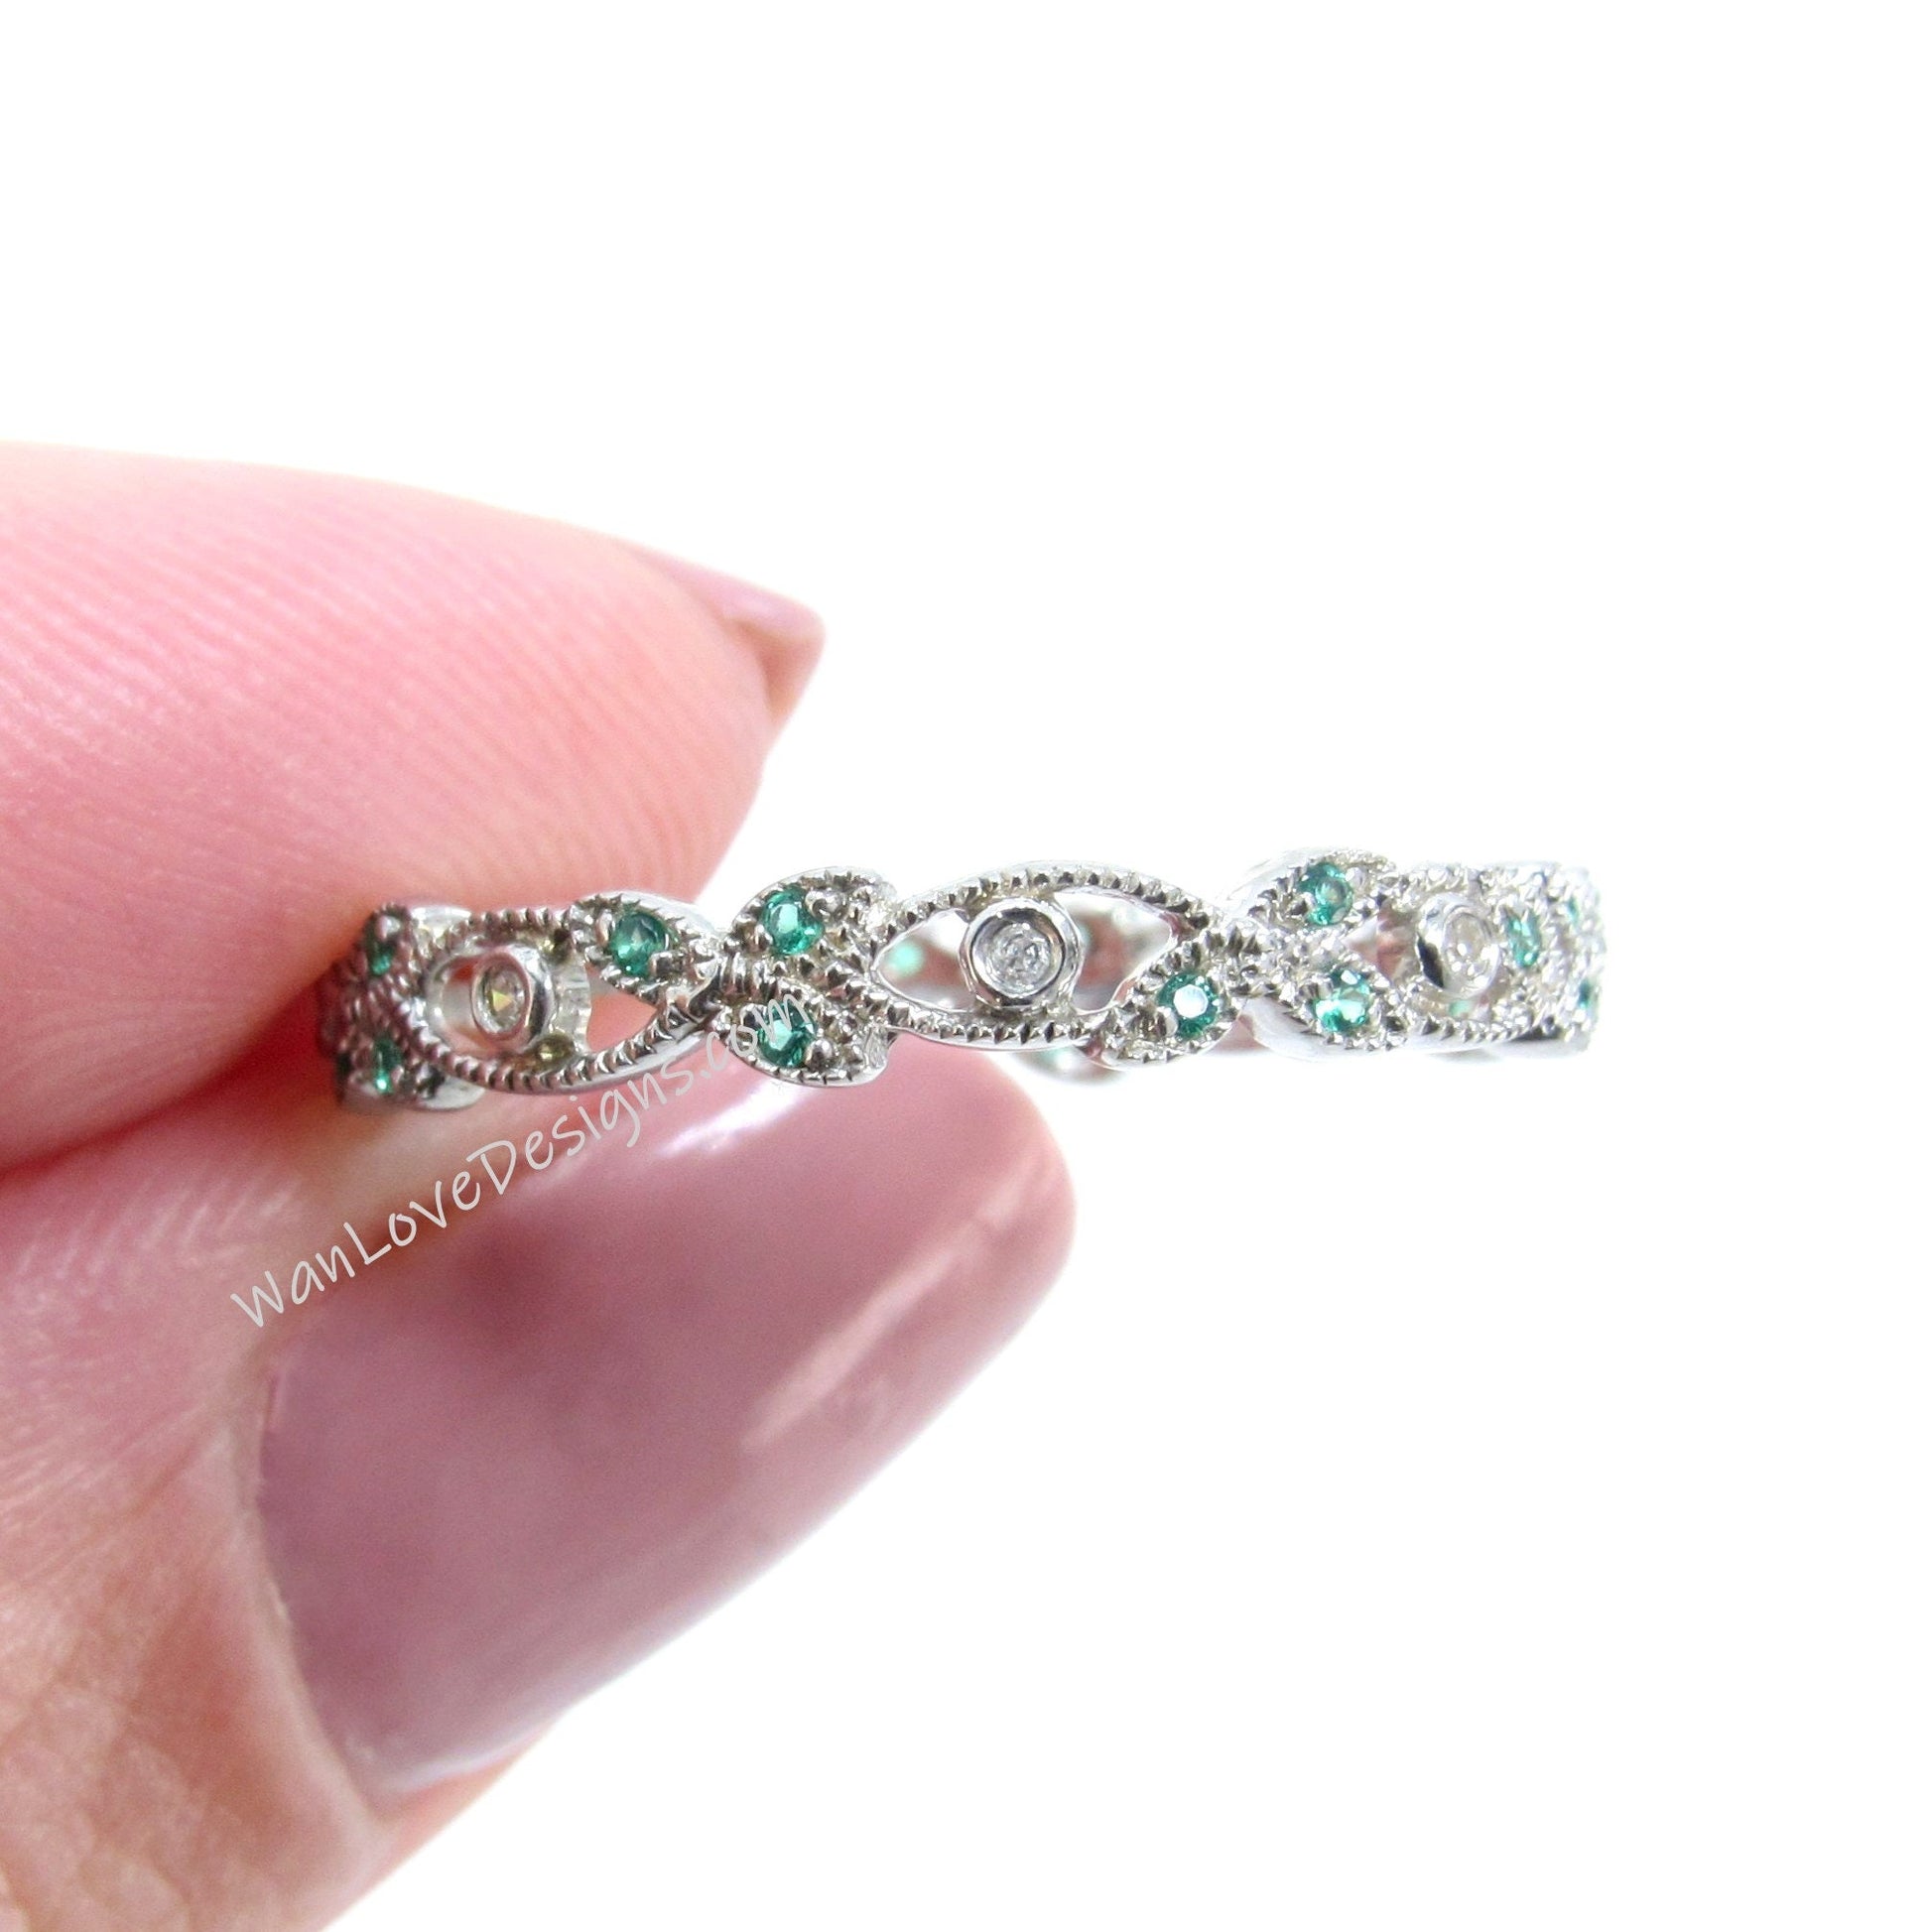 Vintage Green Spinel Diamond wedding band Art deco filigree band Stacking matching band unique Milgrain anniversary promise ring -Ready